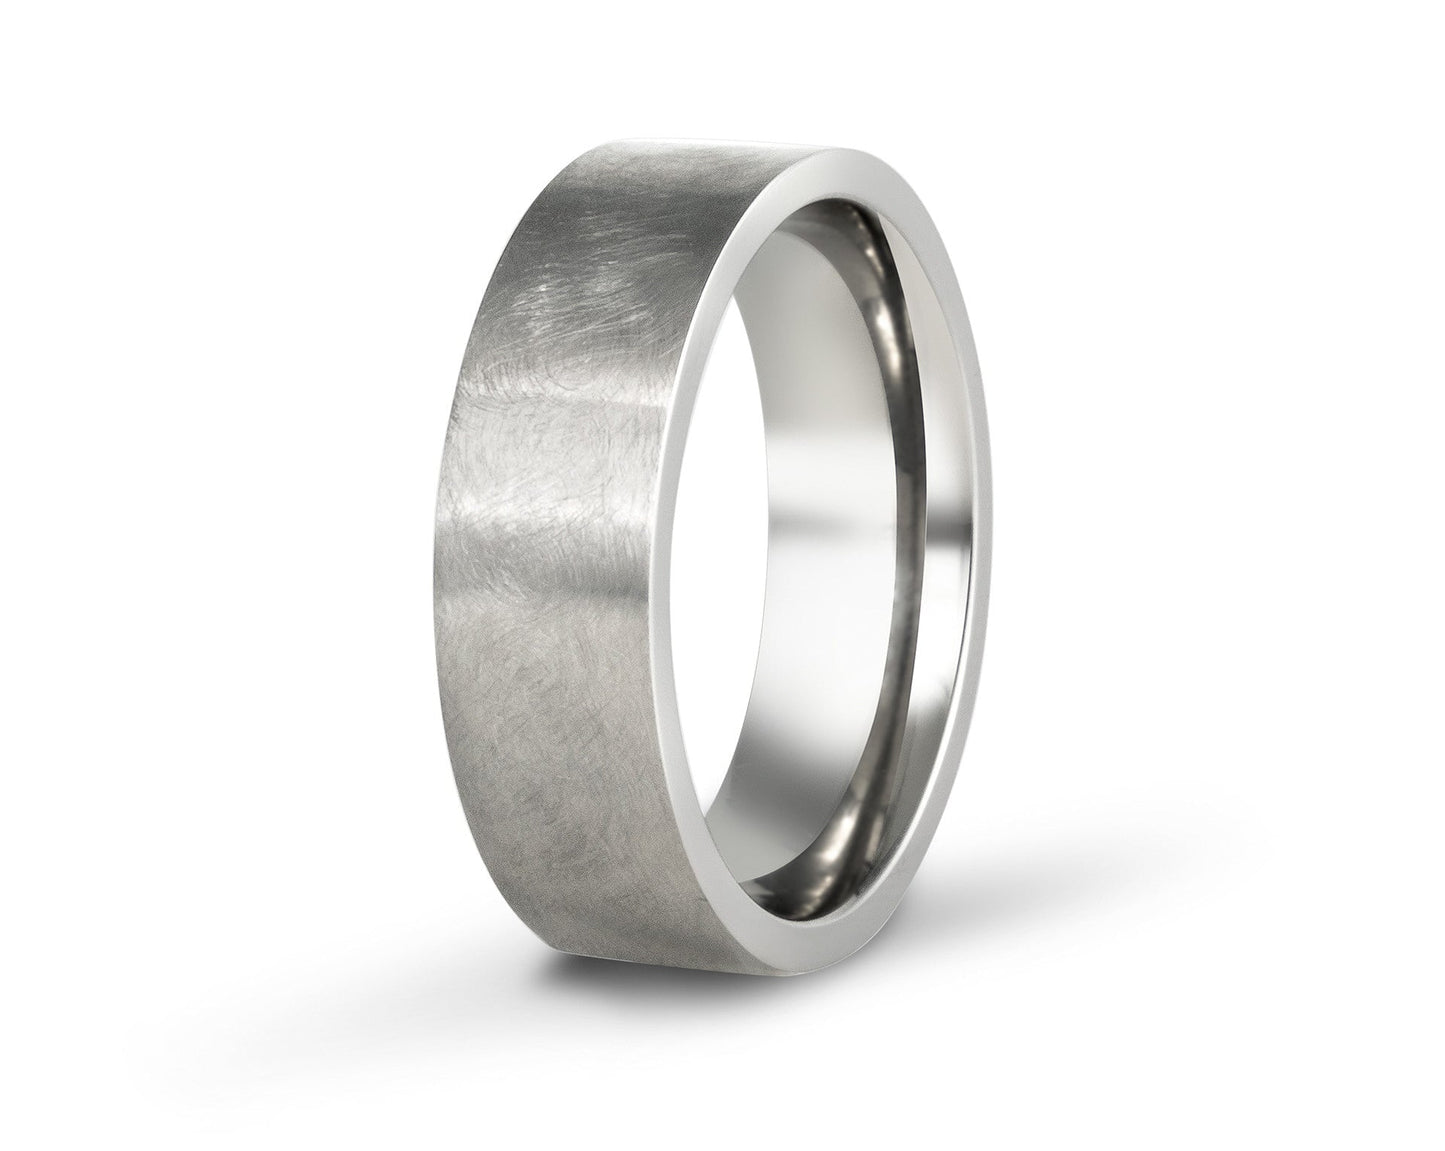 "Brüns" titanium ring with hand-etched finish on a white background